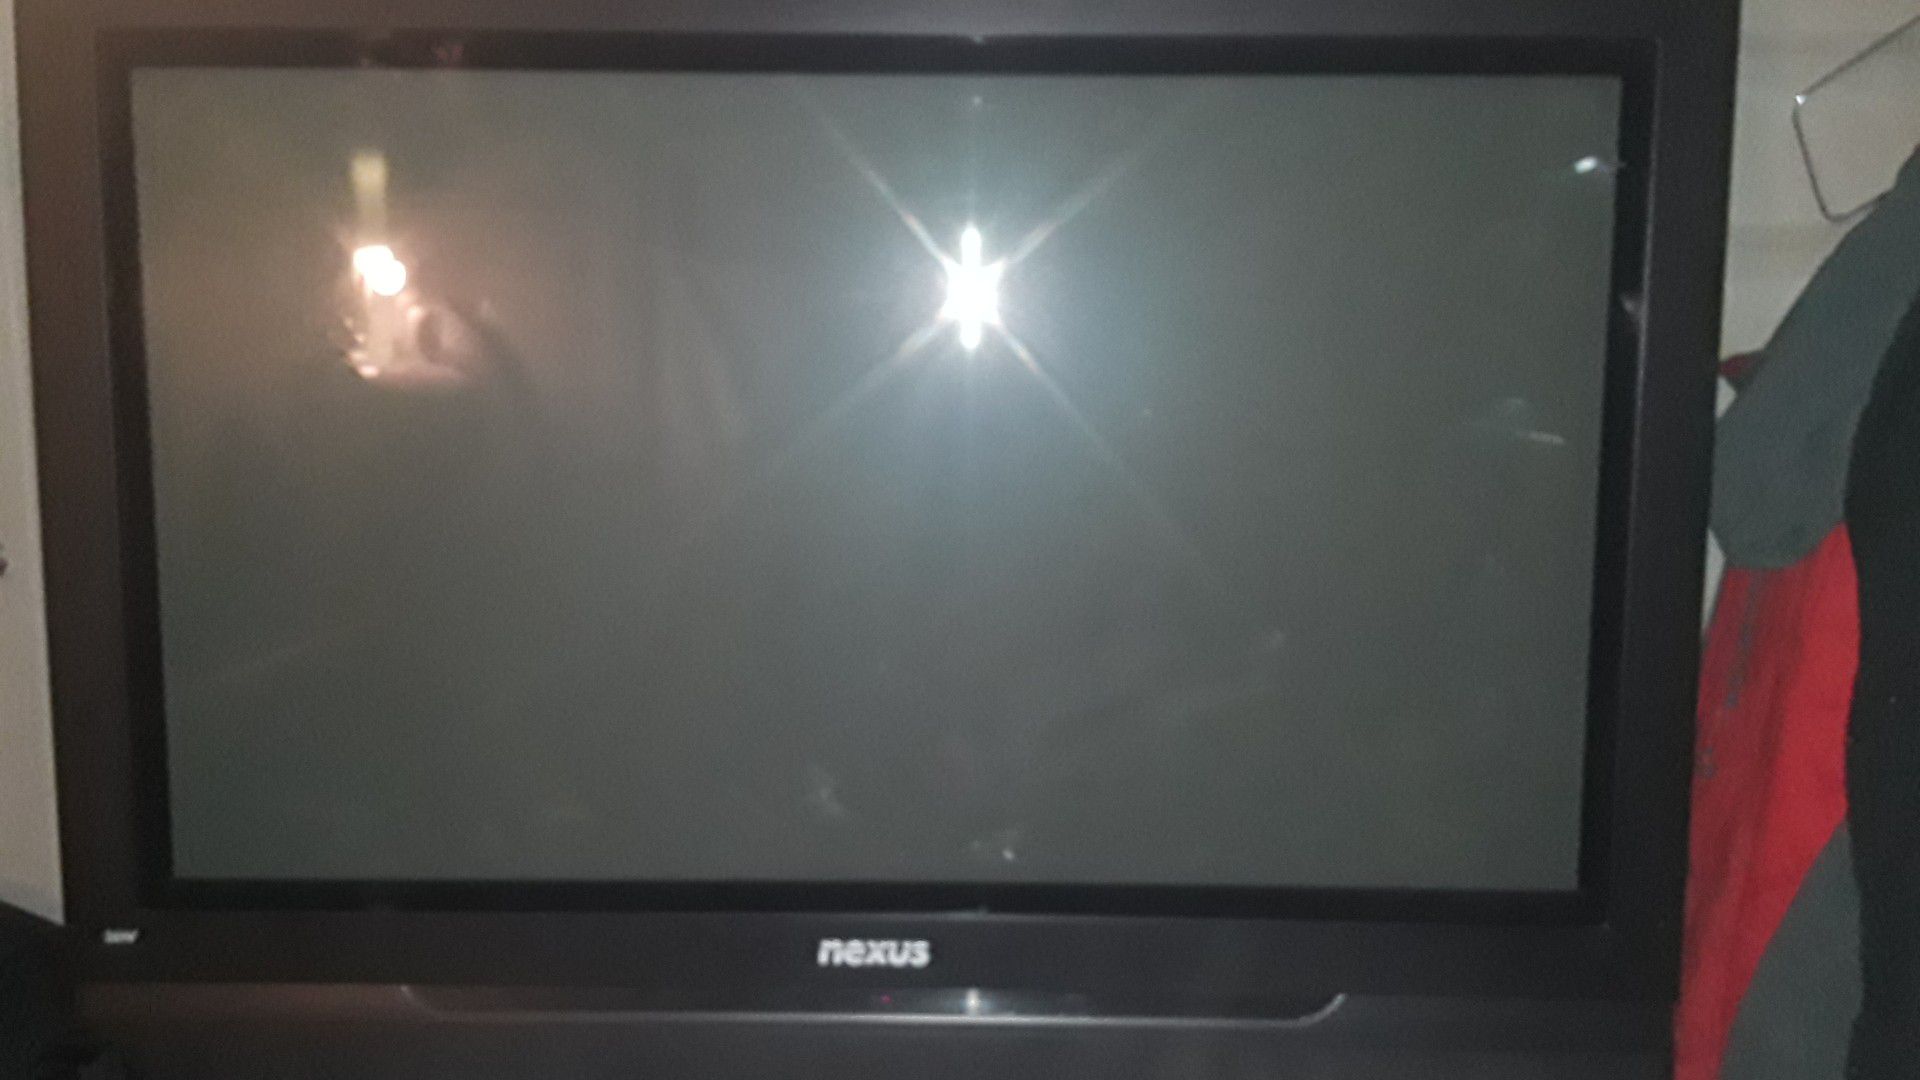 42inch Nexus T.V perfect picture 2 HDMI connections